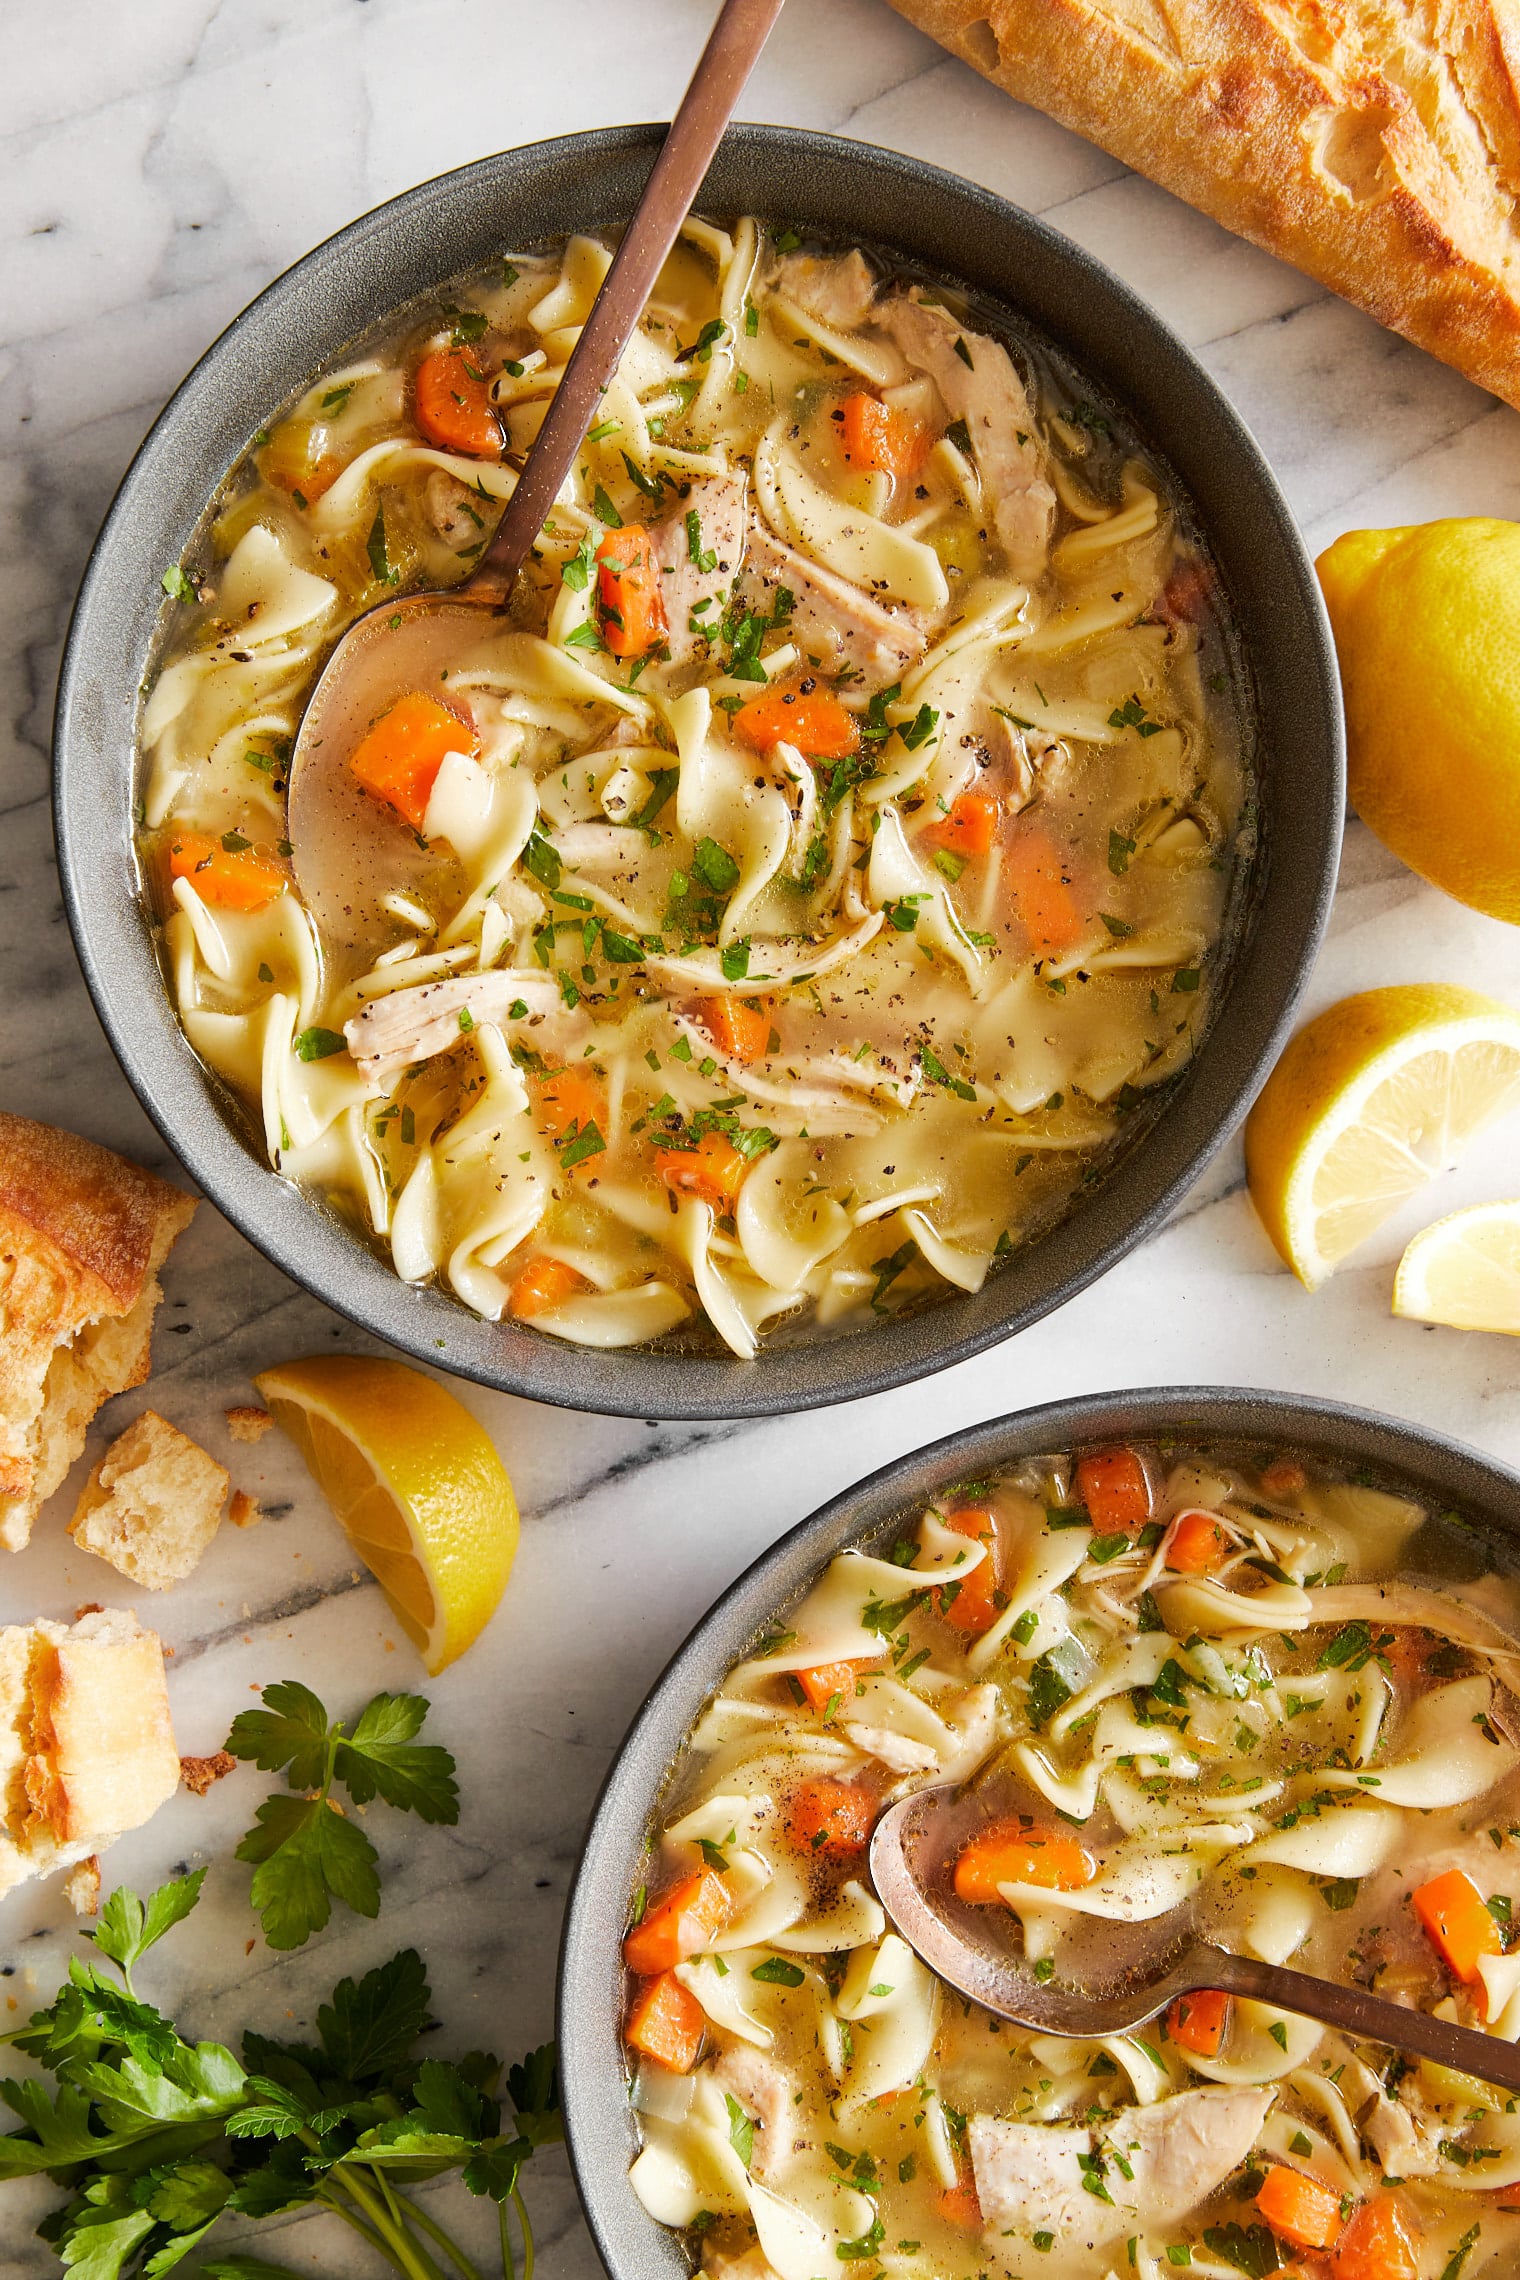 Grandma's Homemade Chicken Noodle Soup (Stovetop or Pressure